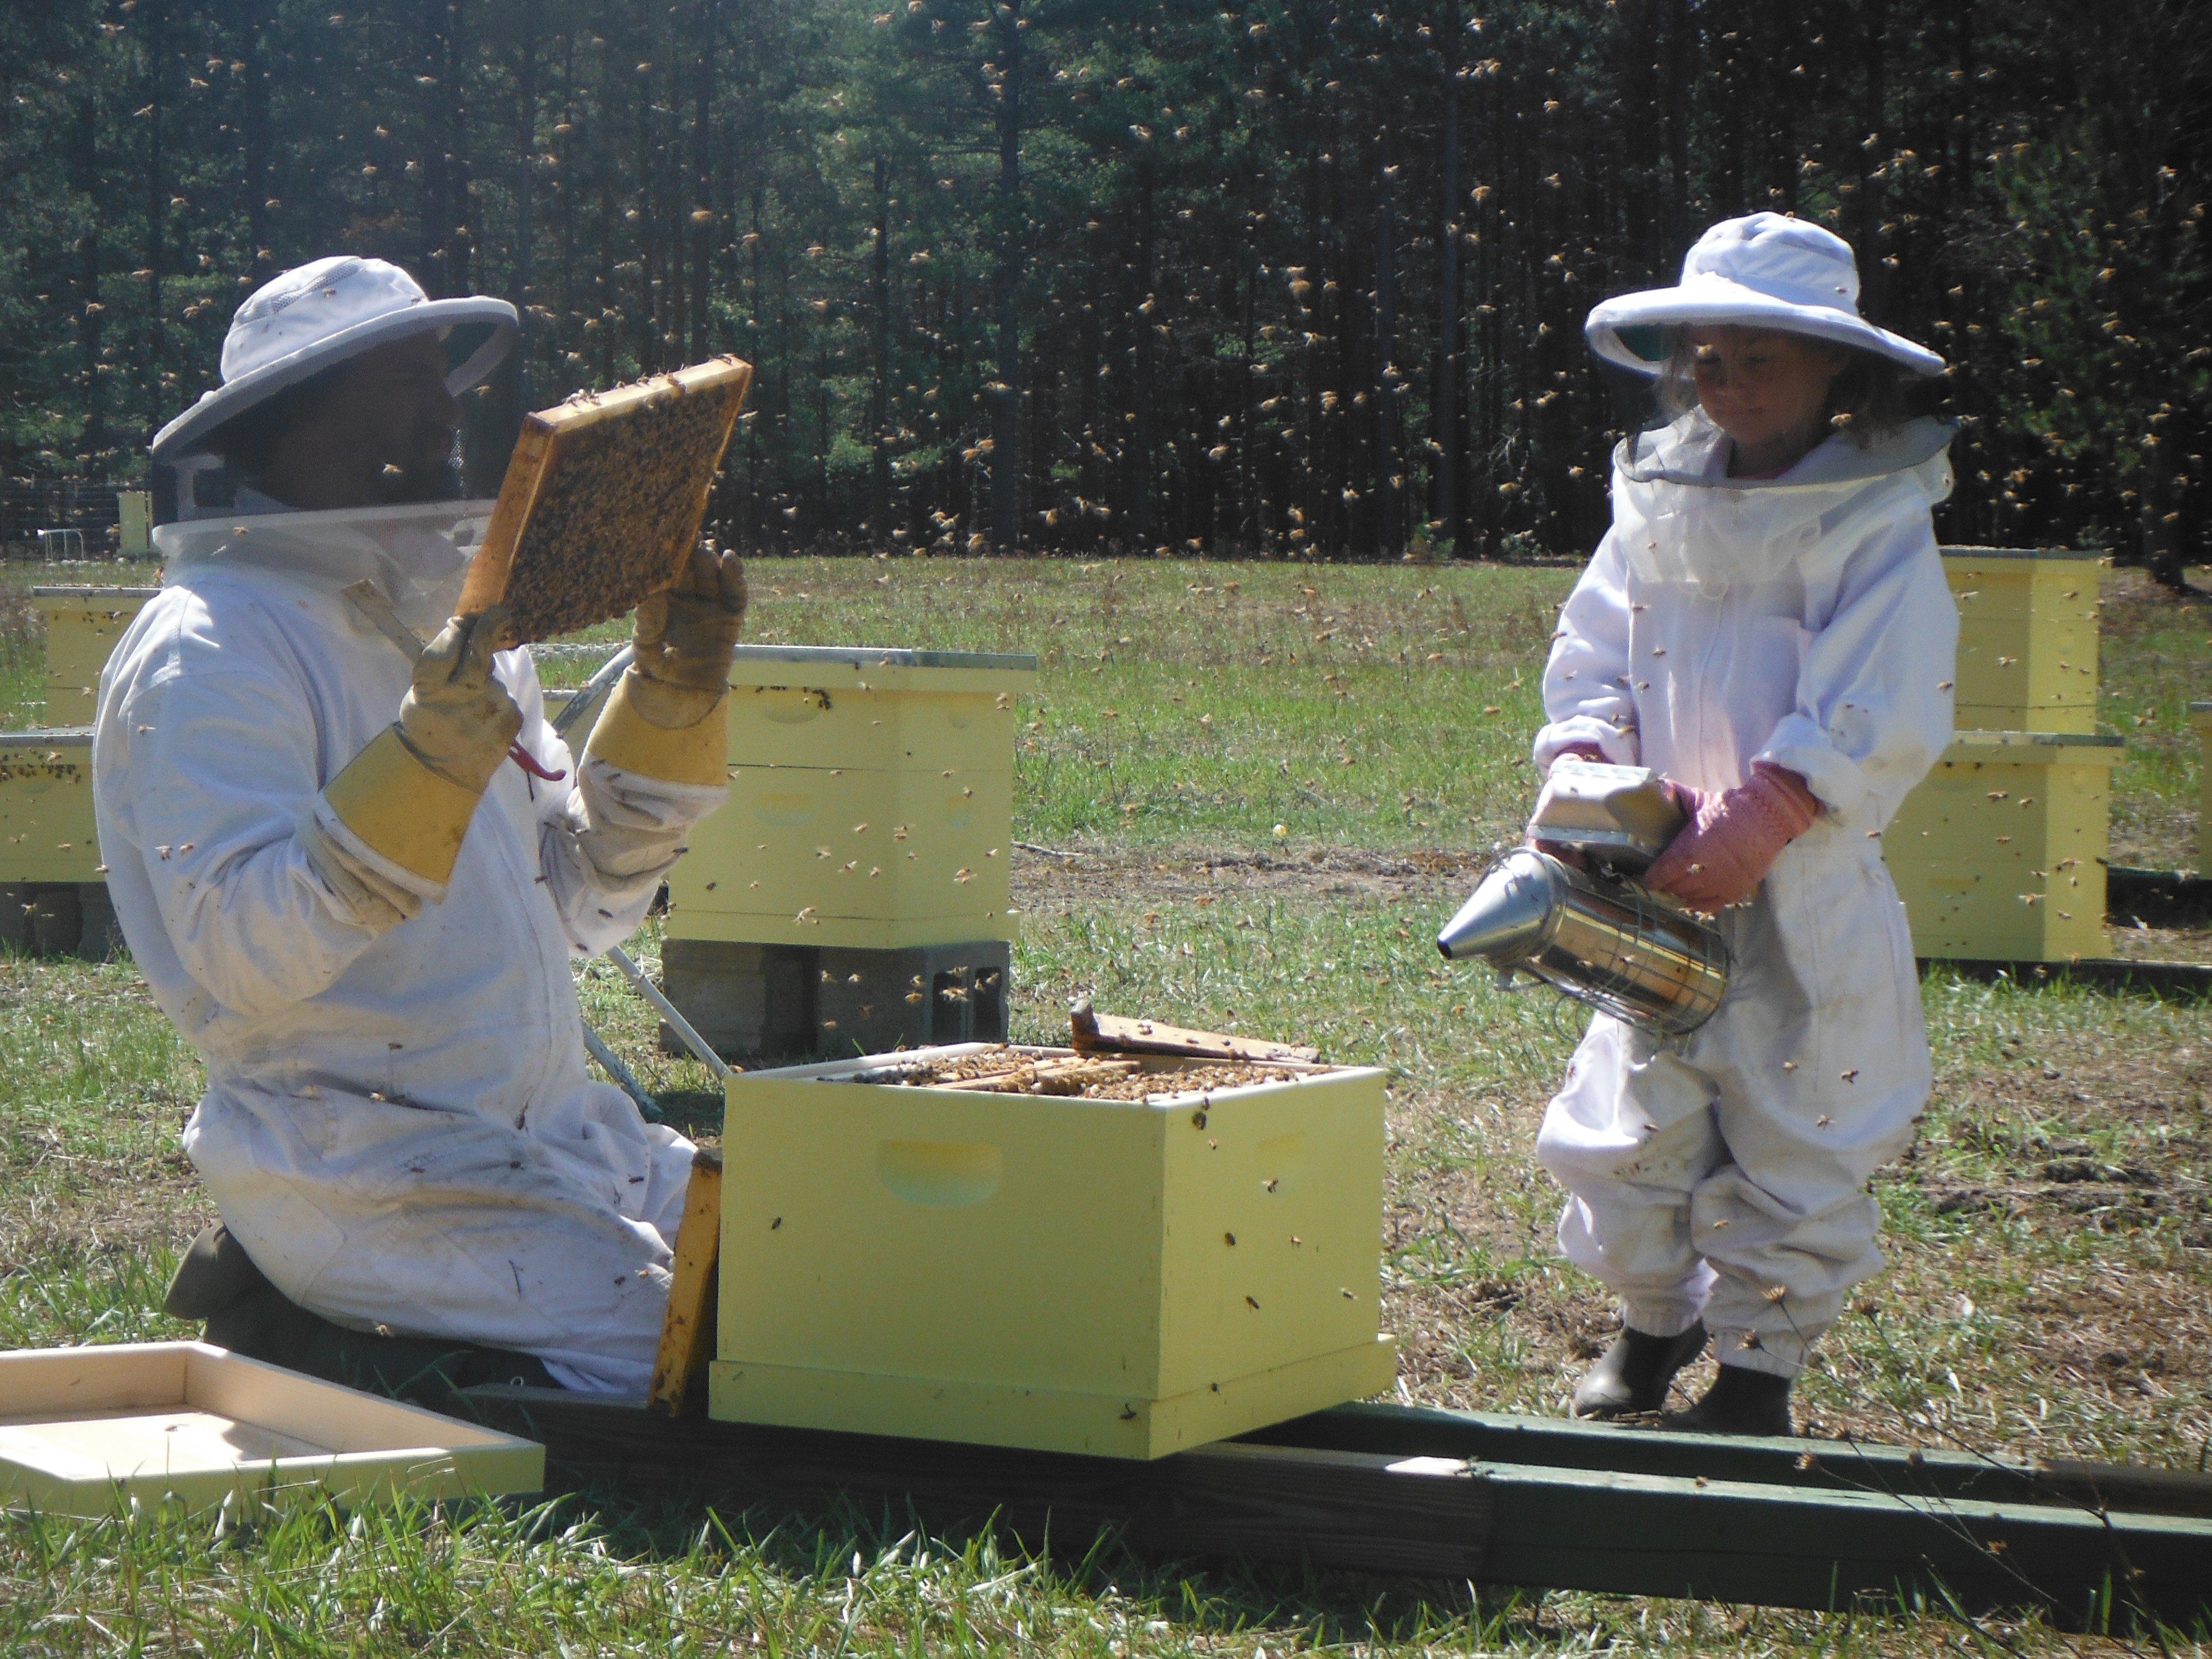 Confessions of a Newbie Beekeeper – Oakland County Blog